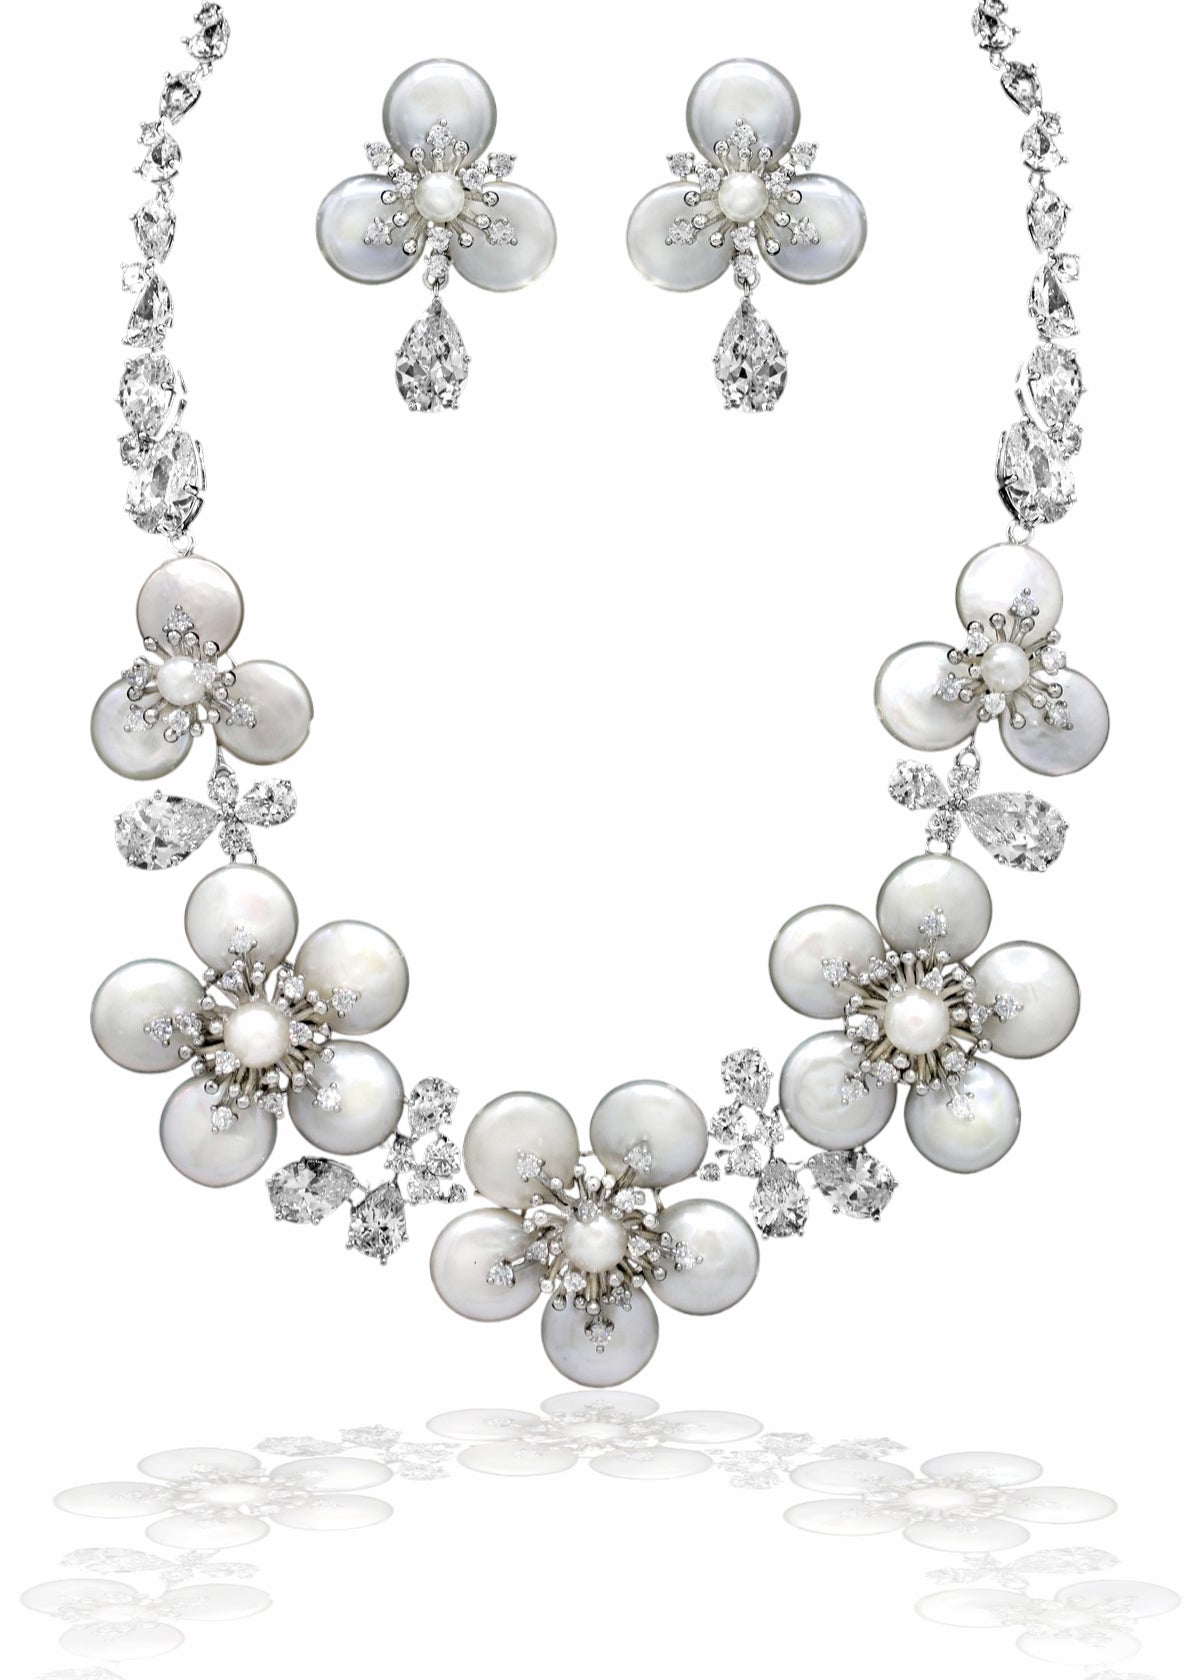 Statement Coin Pearl Flowers Wedding Necklace Set